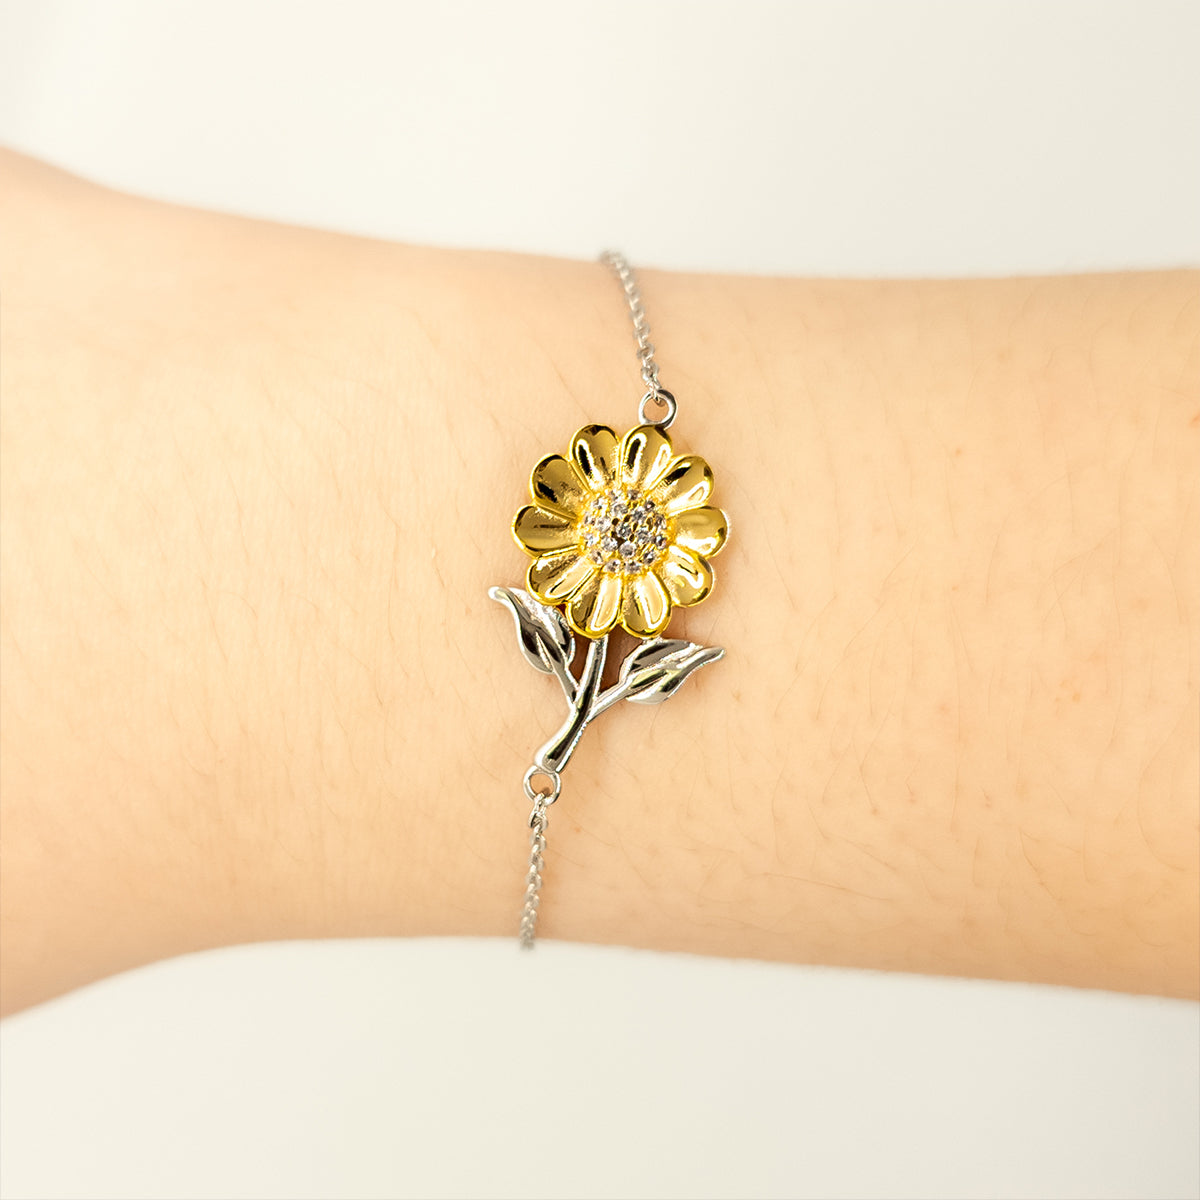 Sunflower Bracelet for Grandma - Youll Always Have a Special Place in My Heart - Unique Gift for Mothers Day, Birthday, Christmas - Engraved Love and Appreciation for Nana